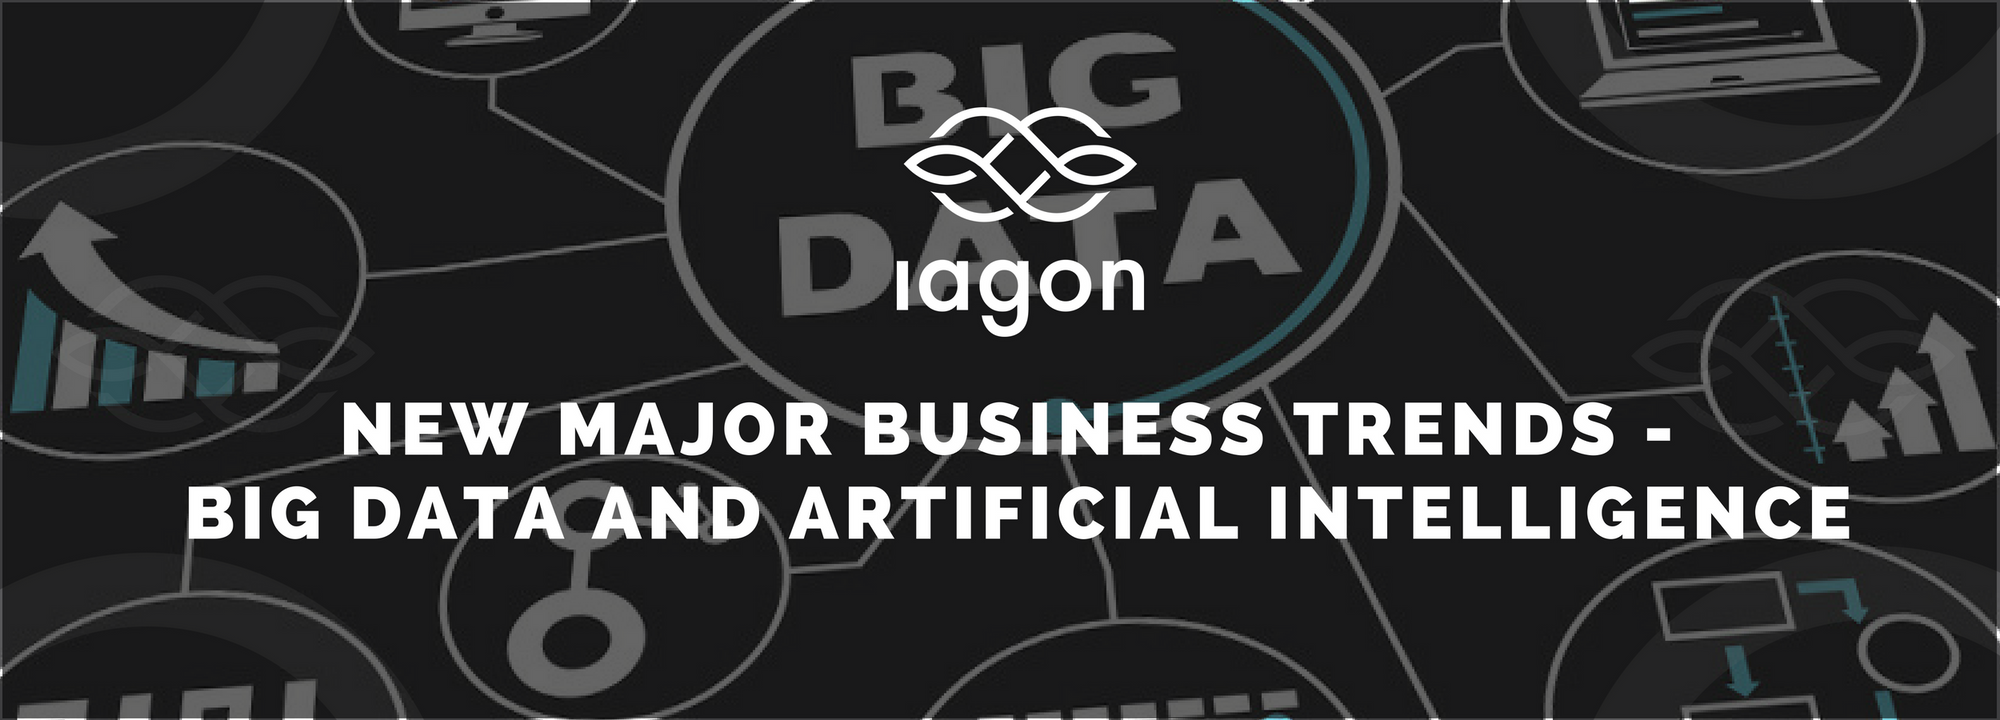 New Major Business Trends: Big Data and Artificial Intelligence